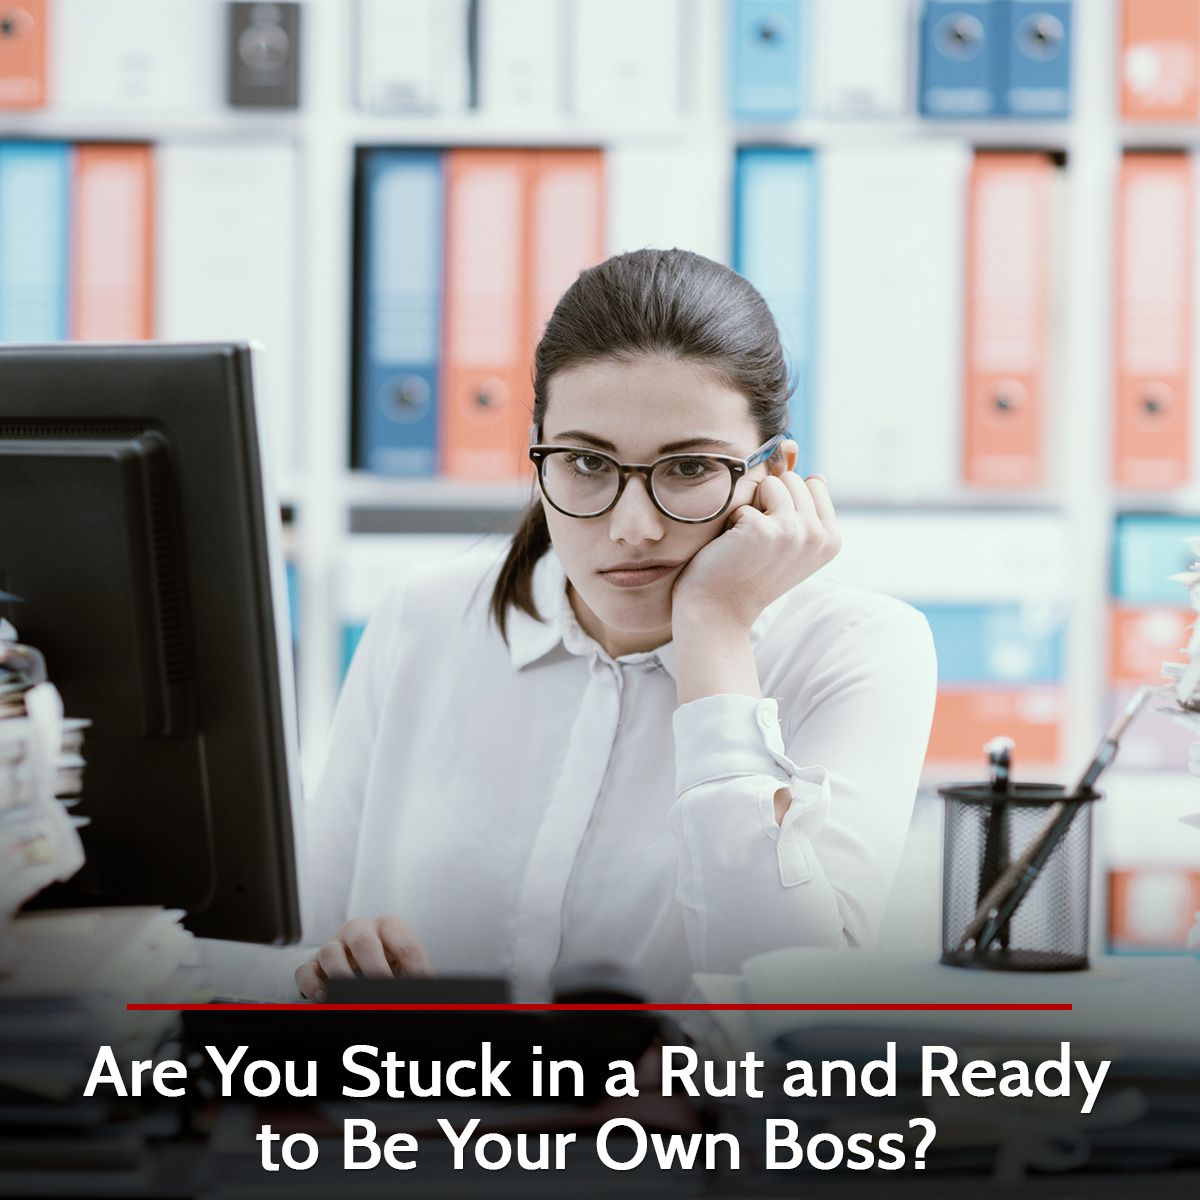 Are You Stuck in a Rut and Ready to Be Your Own Boss?